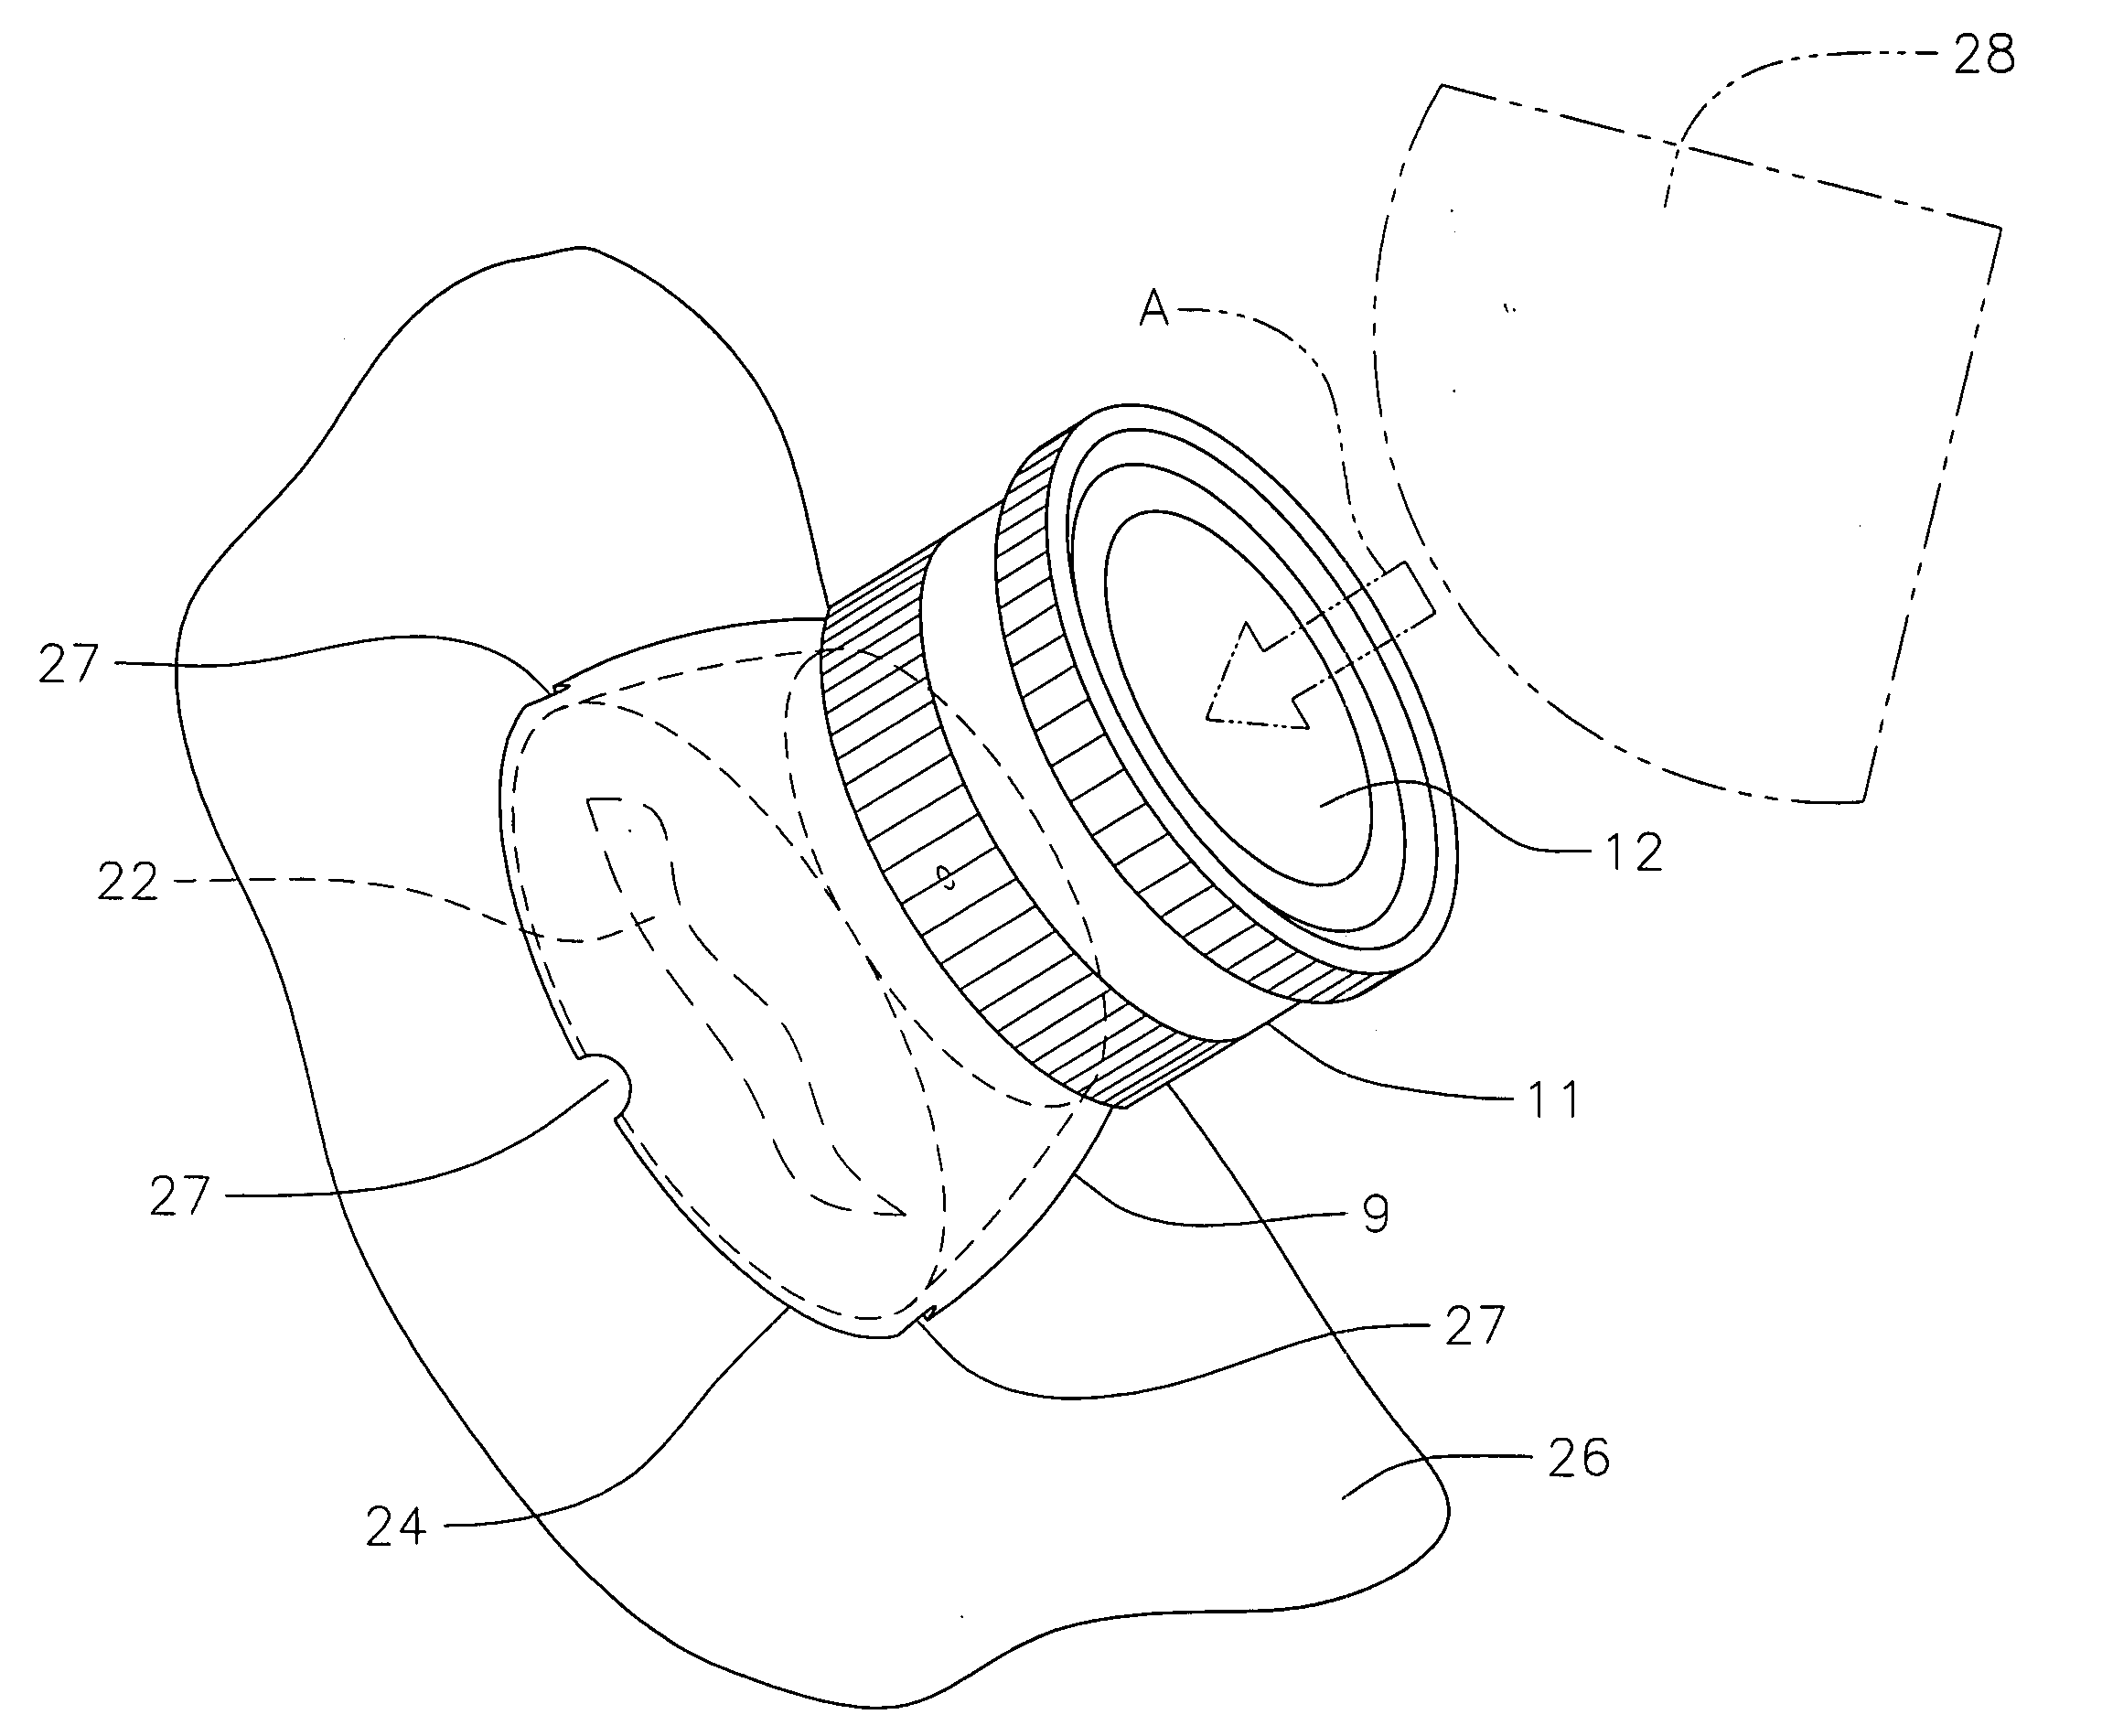 Device for irrigating and inspecting a wound